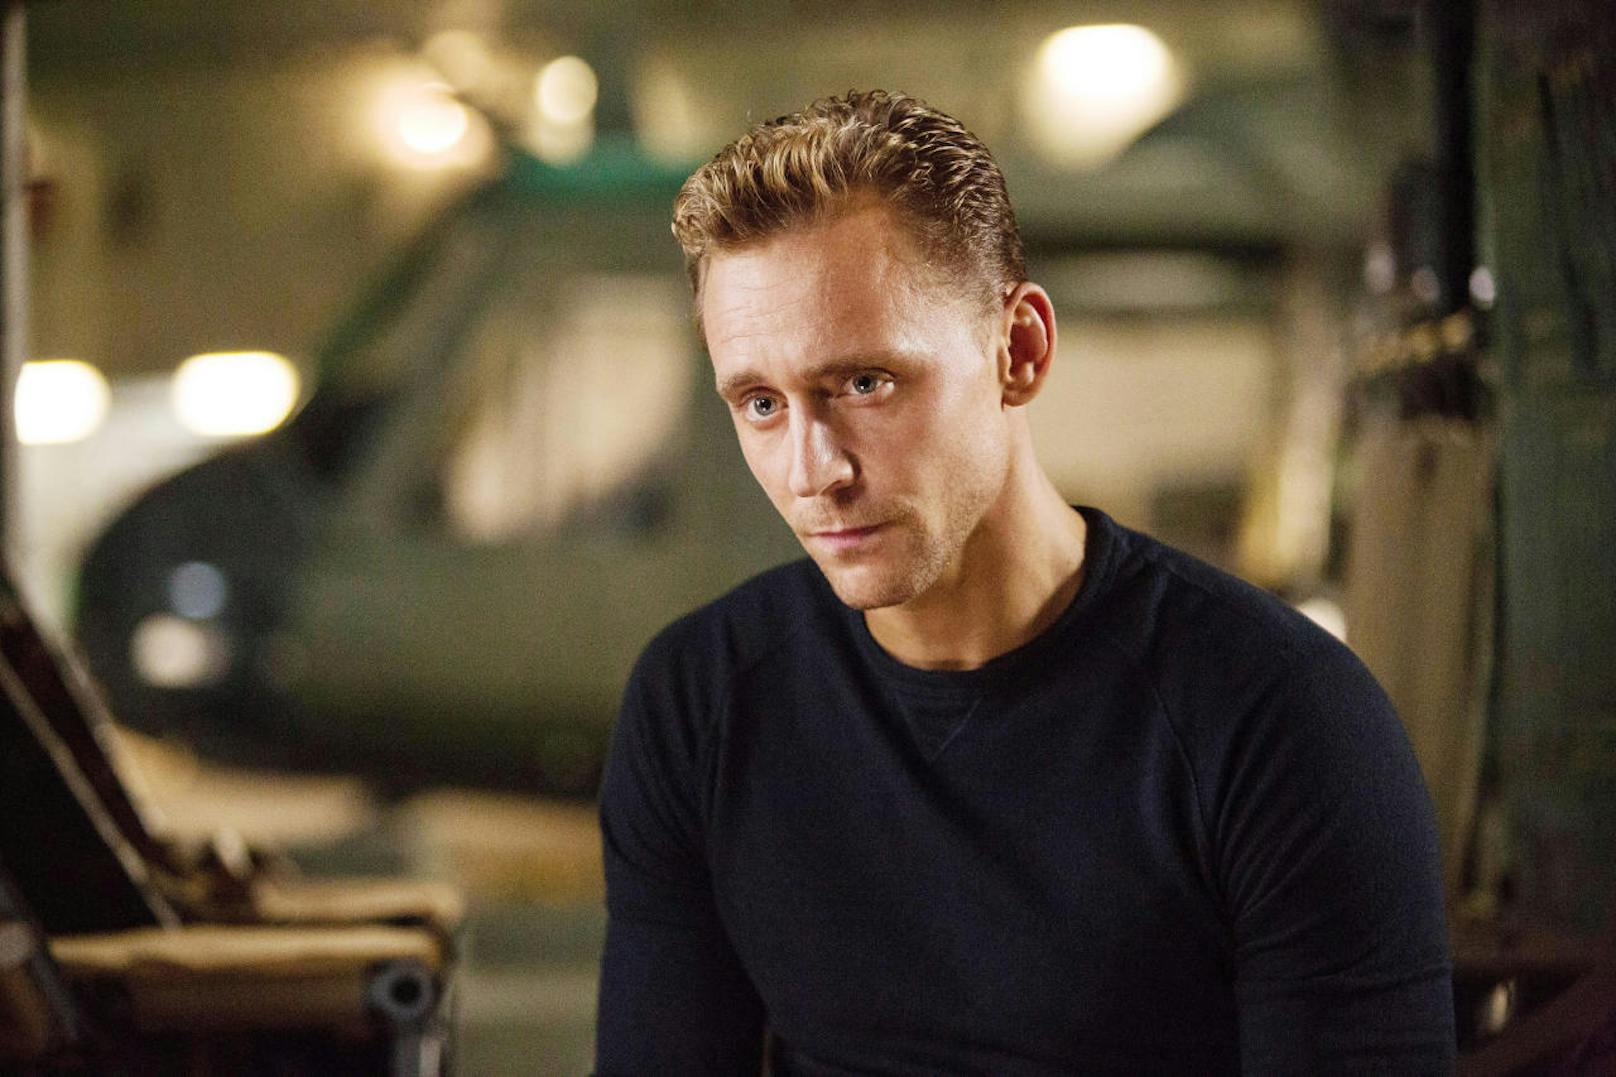 Tom Hiddleston in "The Night Manager"